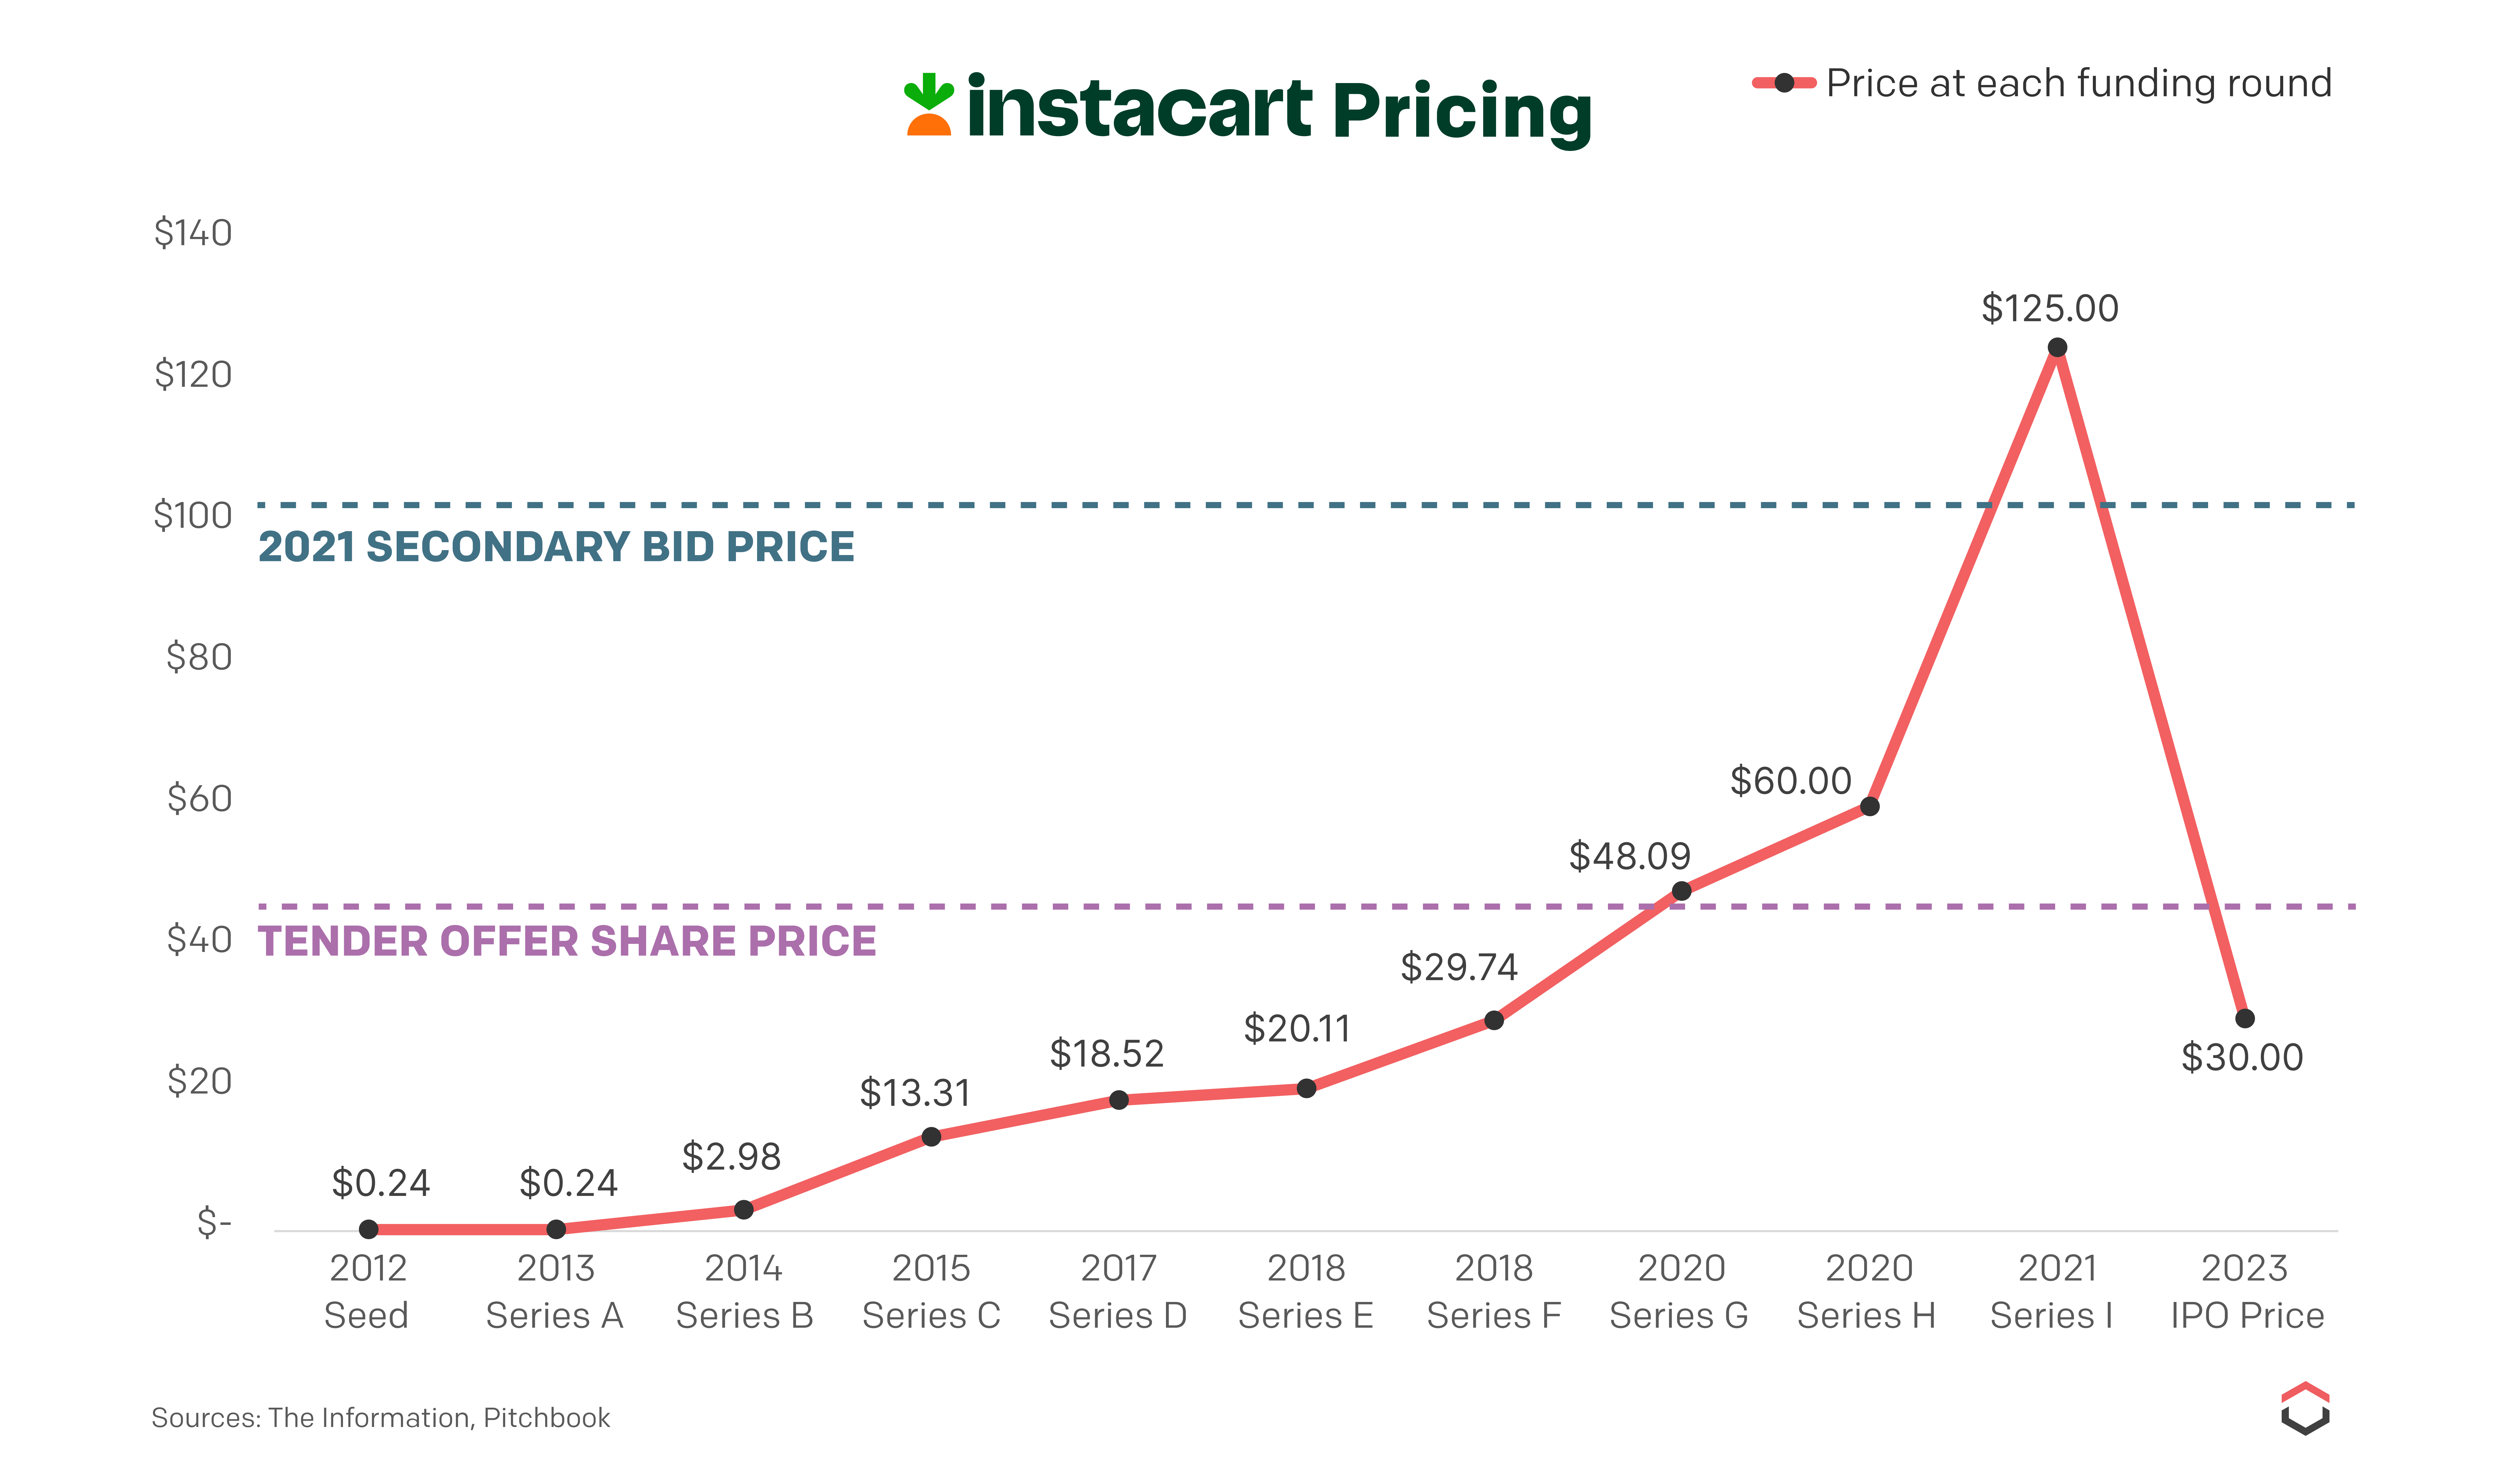 Instacart Pricing Chart on secondary bid versus tender offer share price